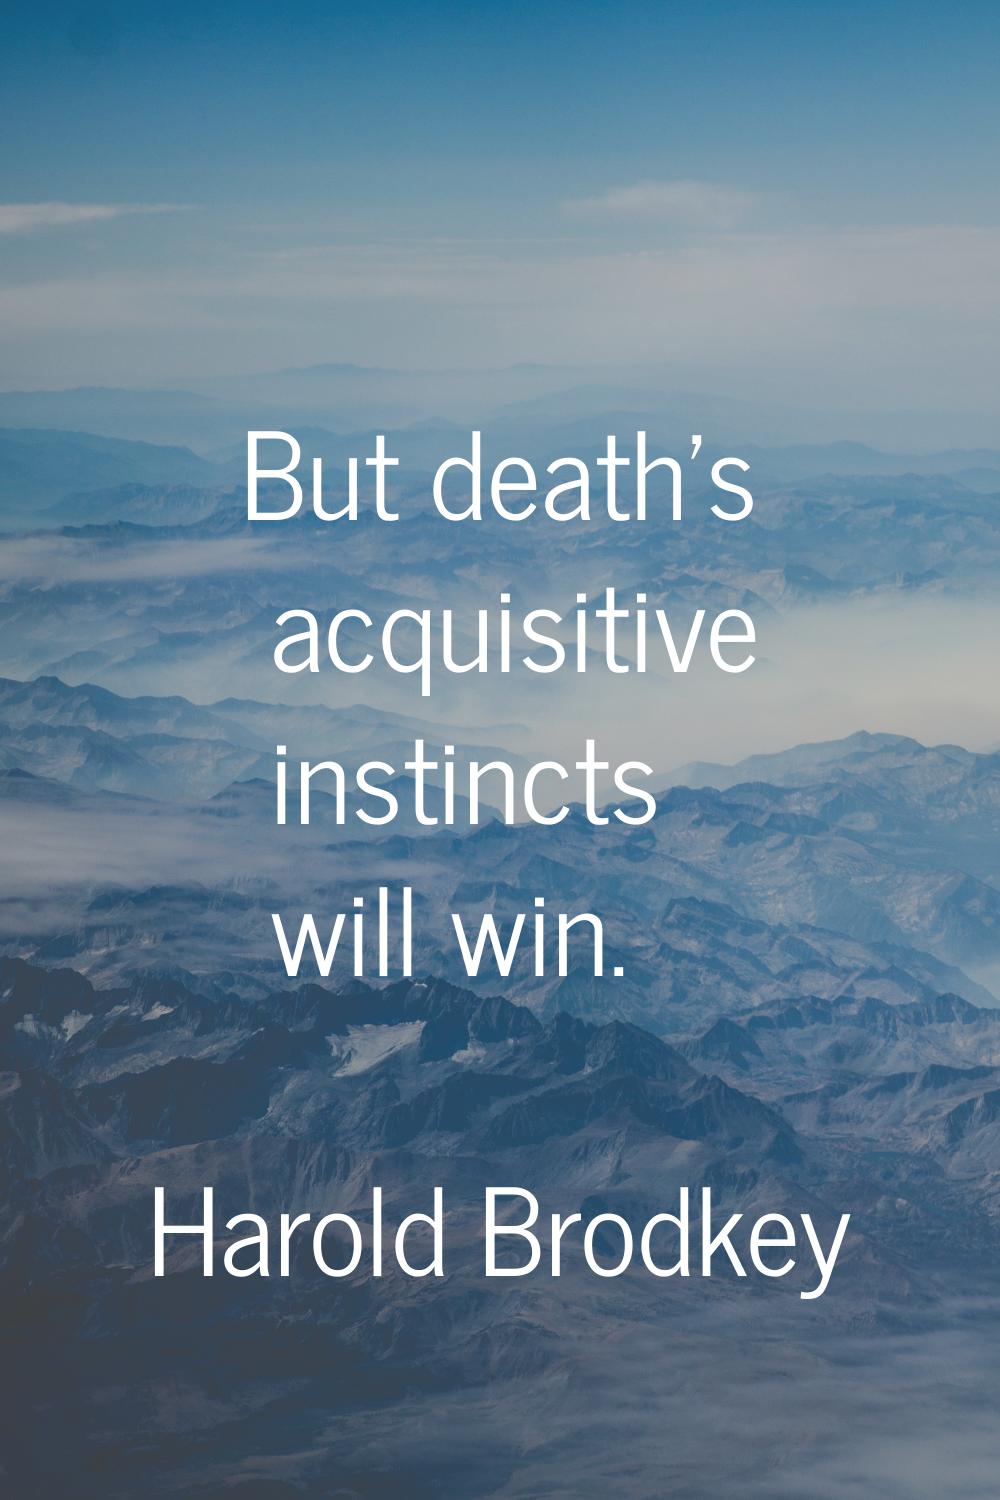 But death's acquisitive instincts will win.